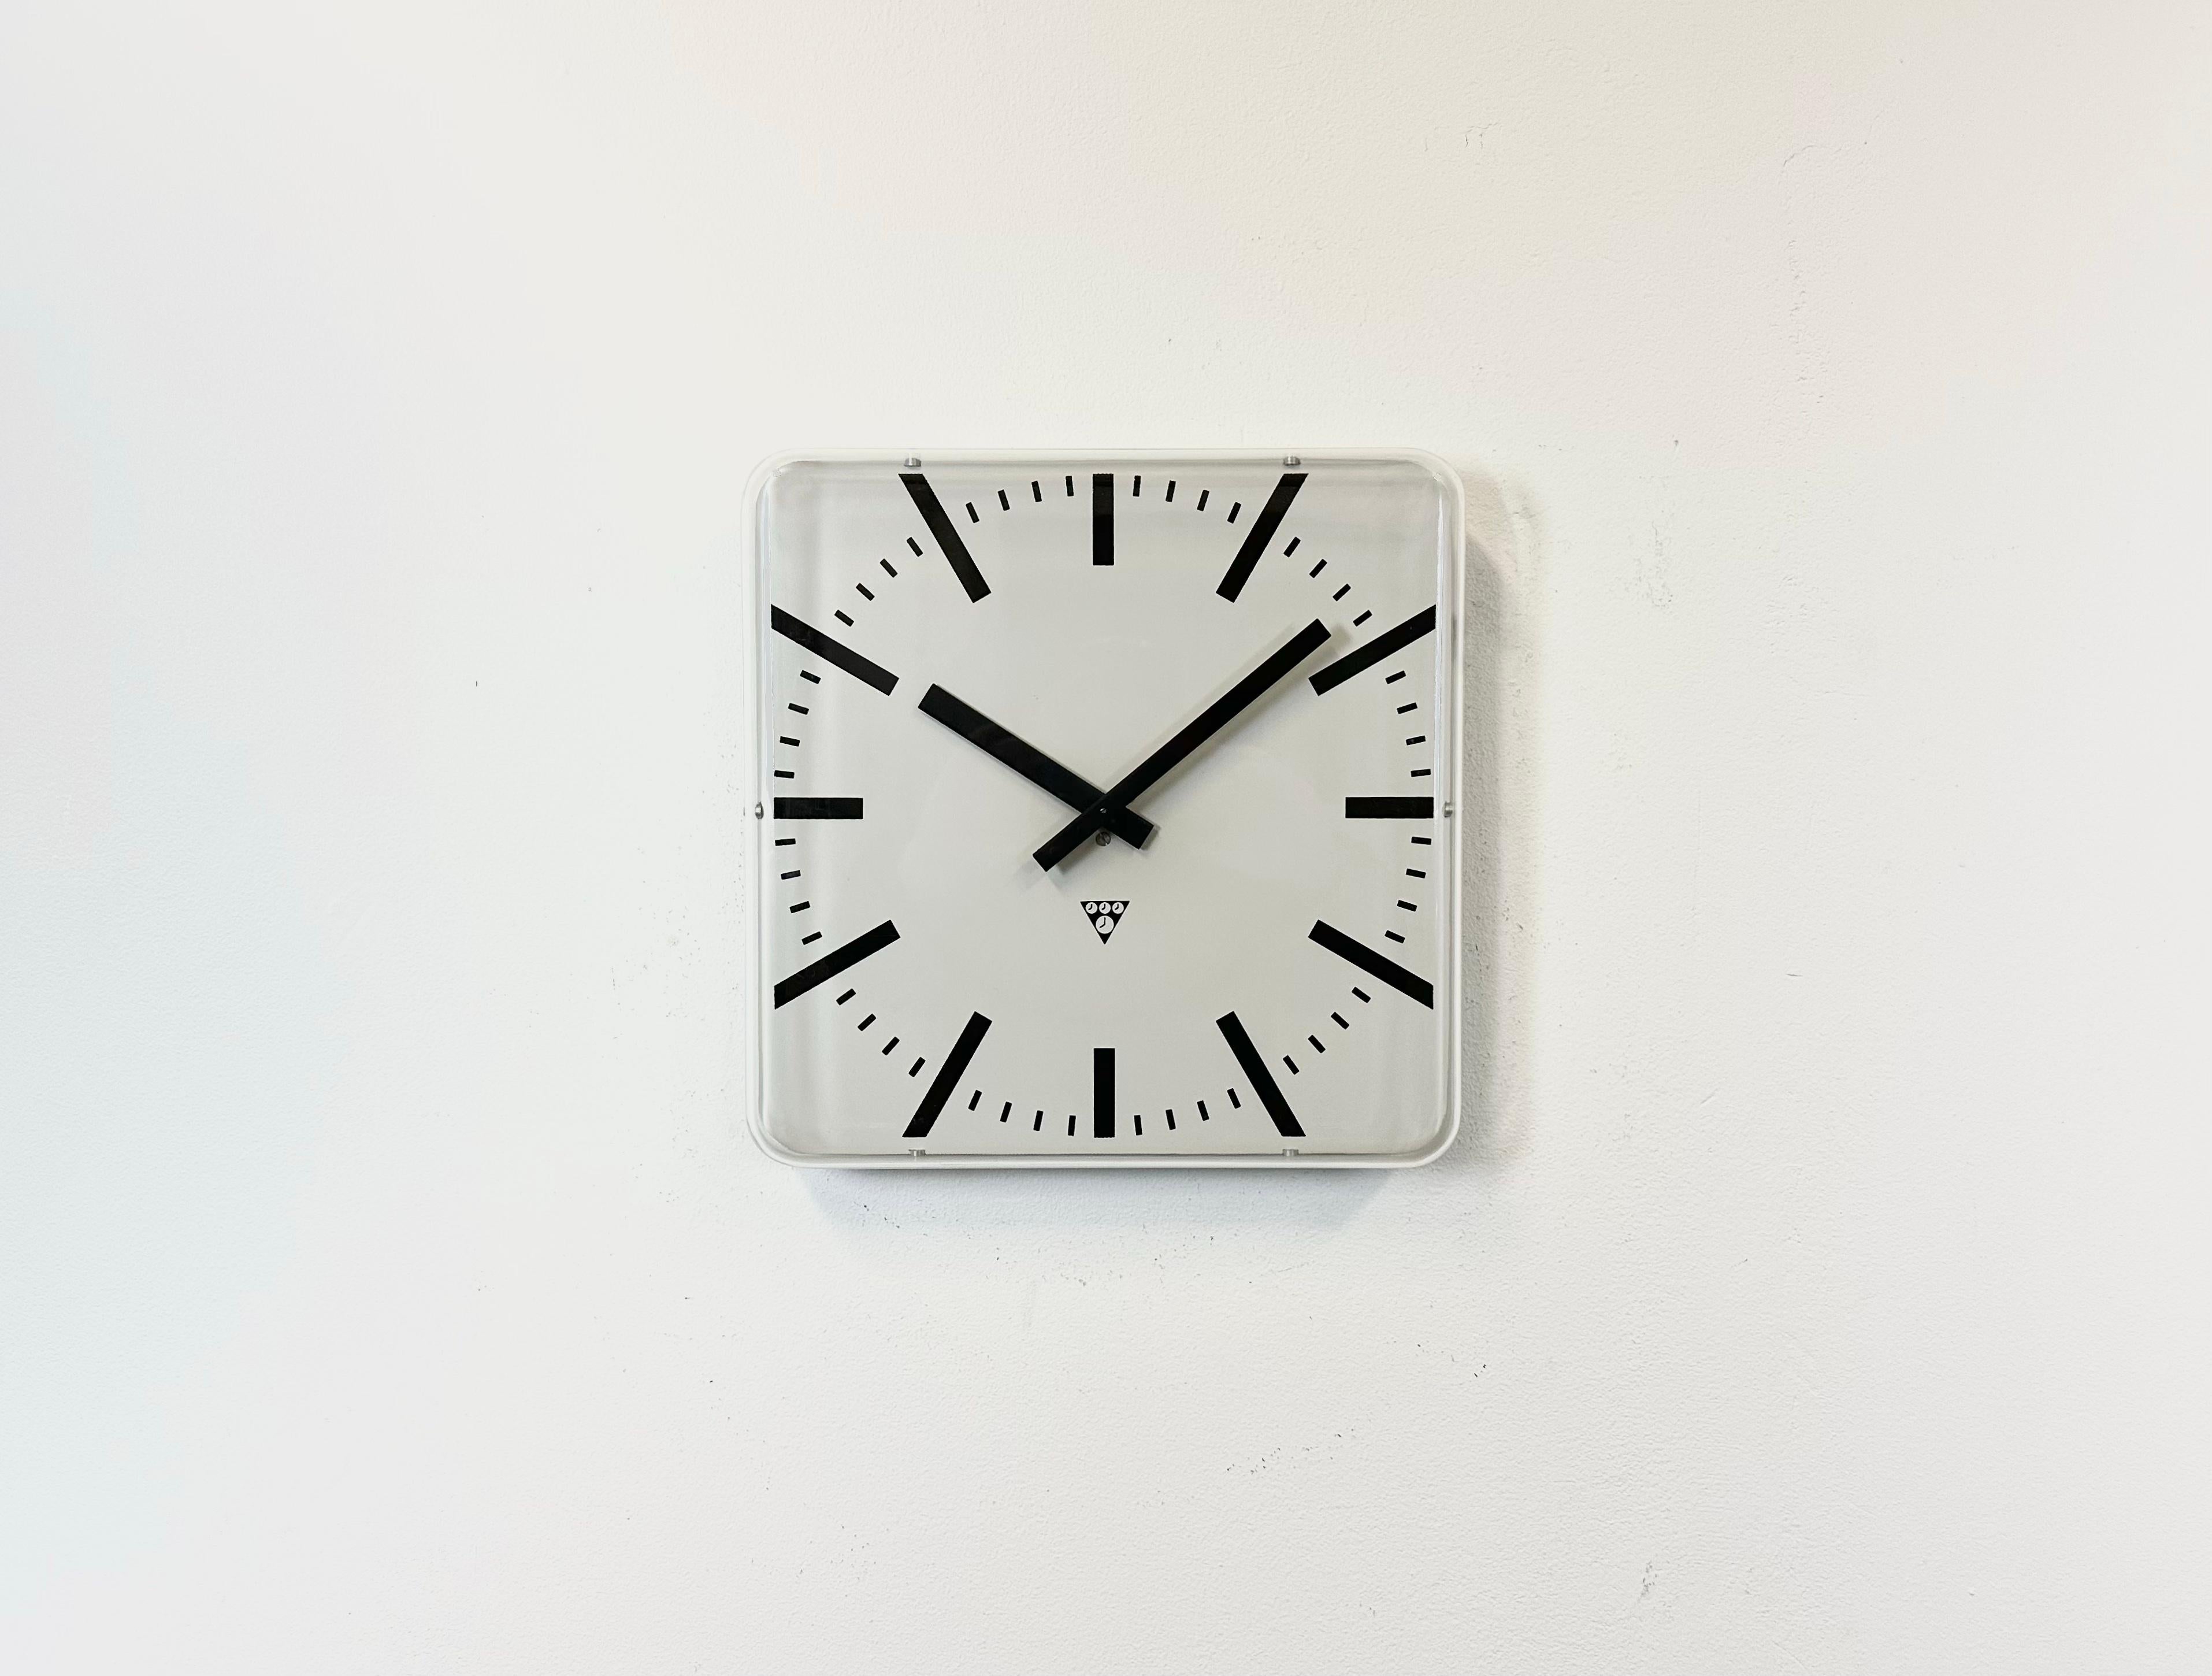 Industrial wall clock produced by Pragotron in former Czechoslovakia during the 1980s. It features a square aluminium dial and a curved plastic clear glass cover. The piece has been converted into a battery-powered clockwork and requires only one